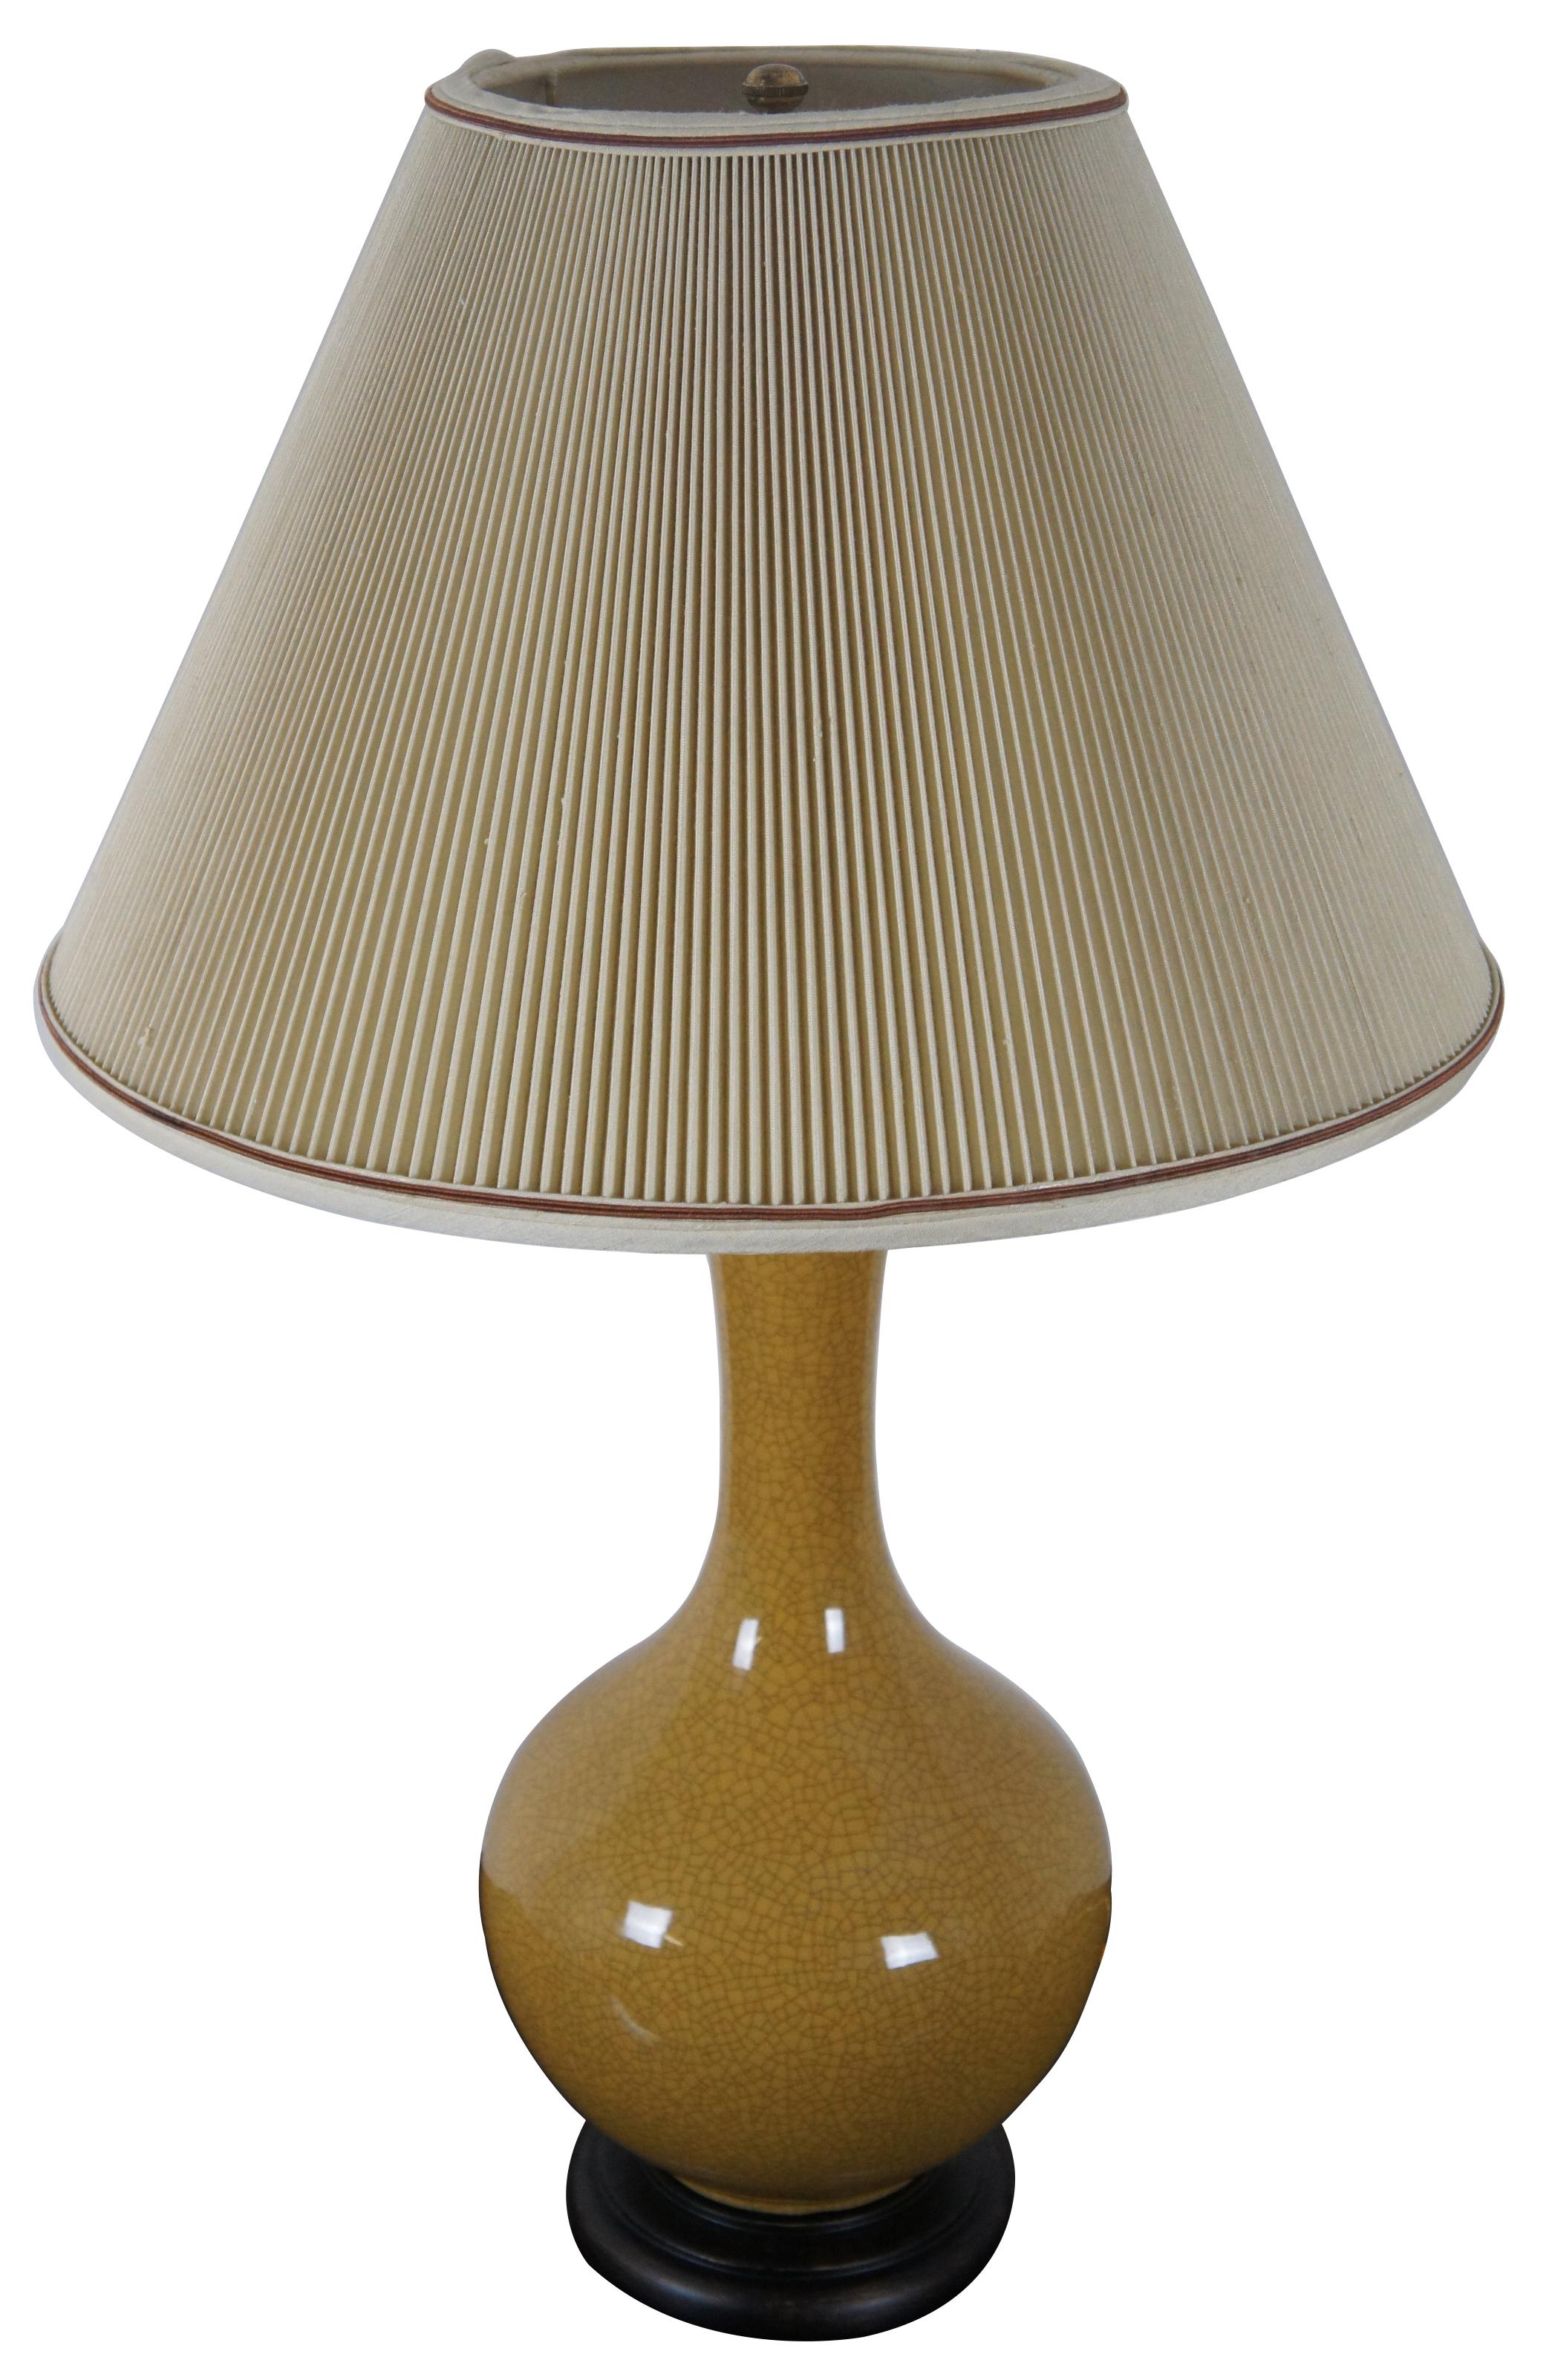 Circa 1970s ceramic table lamp by Frederick Cooper. Features a mustard yellow glaze with a dark crackle finish and wooden base.

Measures: 8.5” x 21.5” / shade 17.5” x 11.25” / height to top of finial 29.25” (diameter x height).